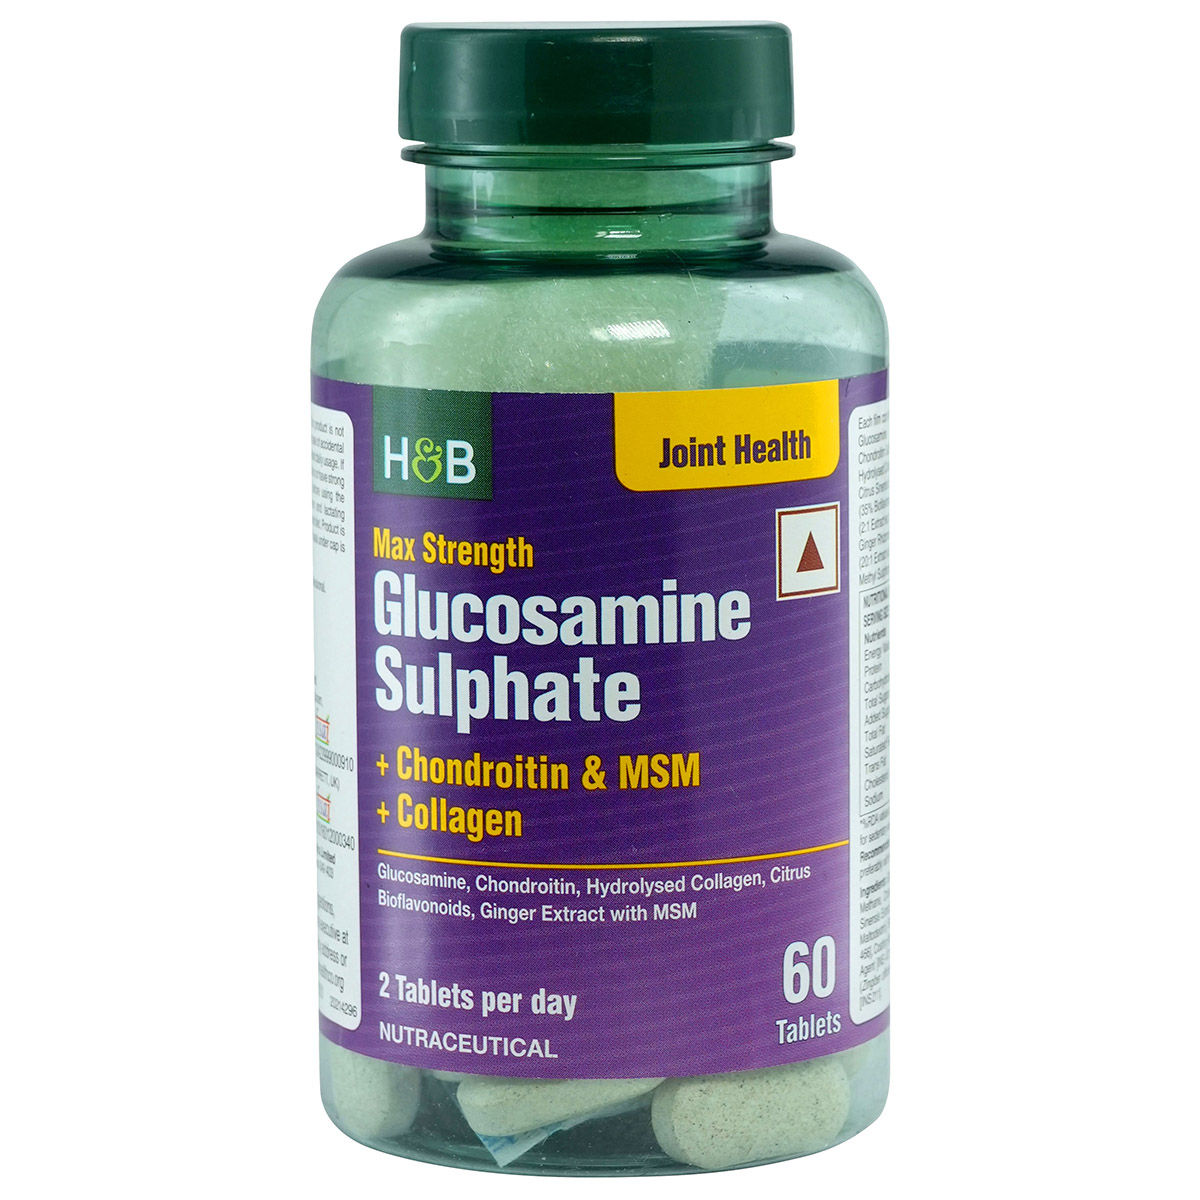 Buy Holland & Barrett Max Strength Glucosamine Sulphate for Joint Health, 60 Tablets Online